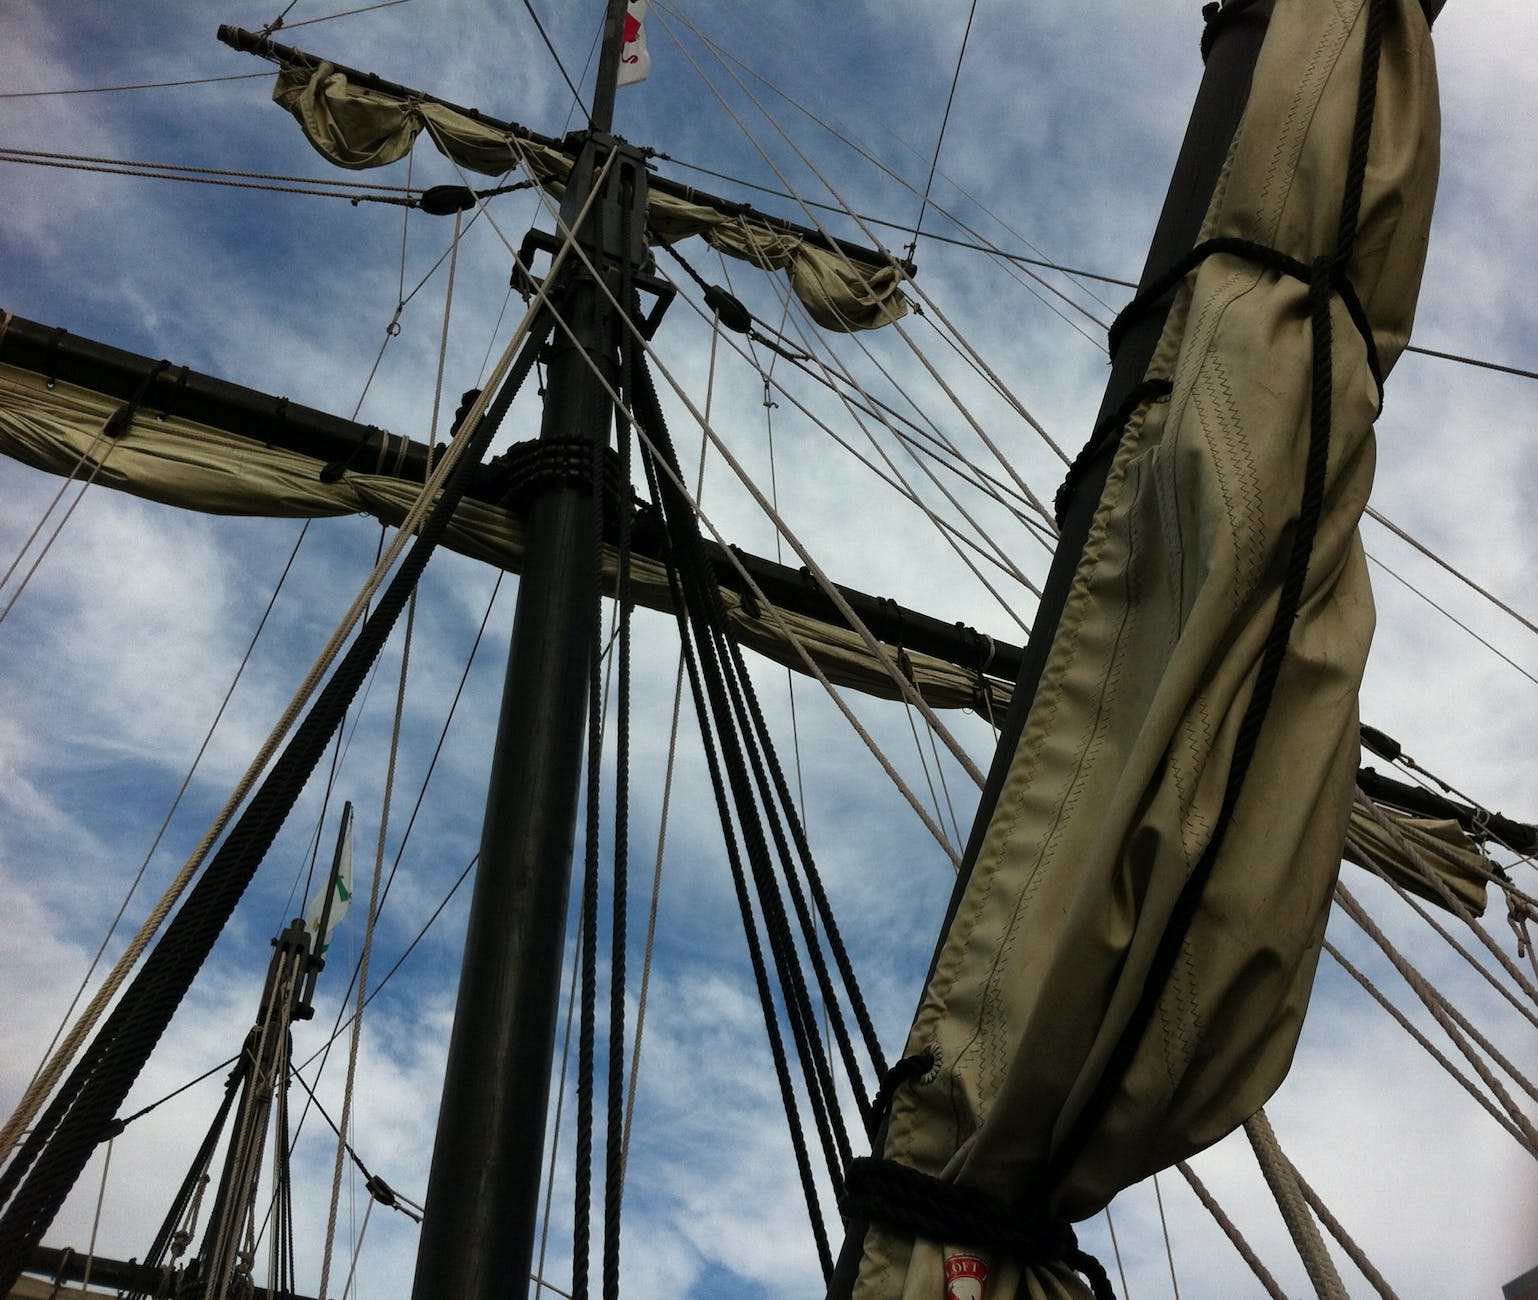 low angle photography of rolled up sails on ship under cloudy sky